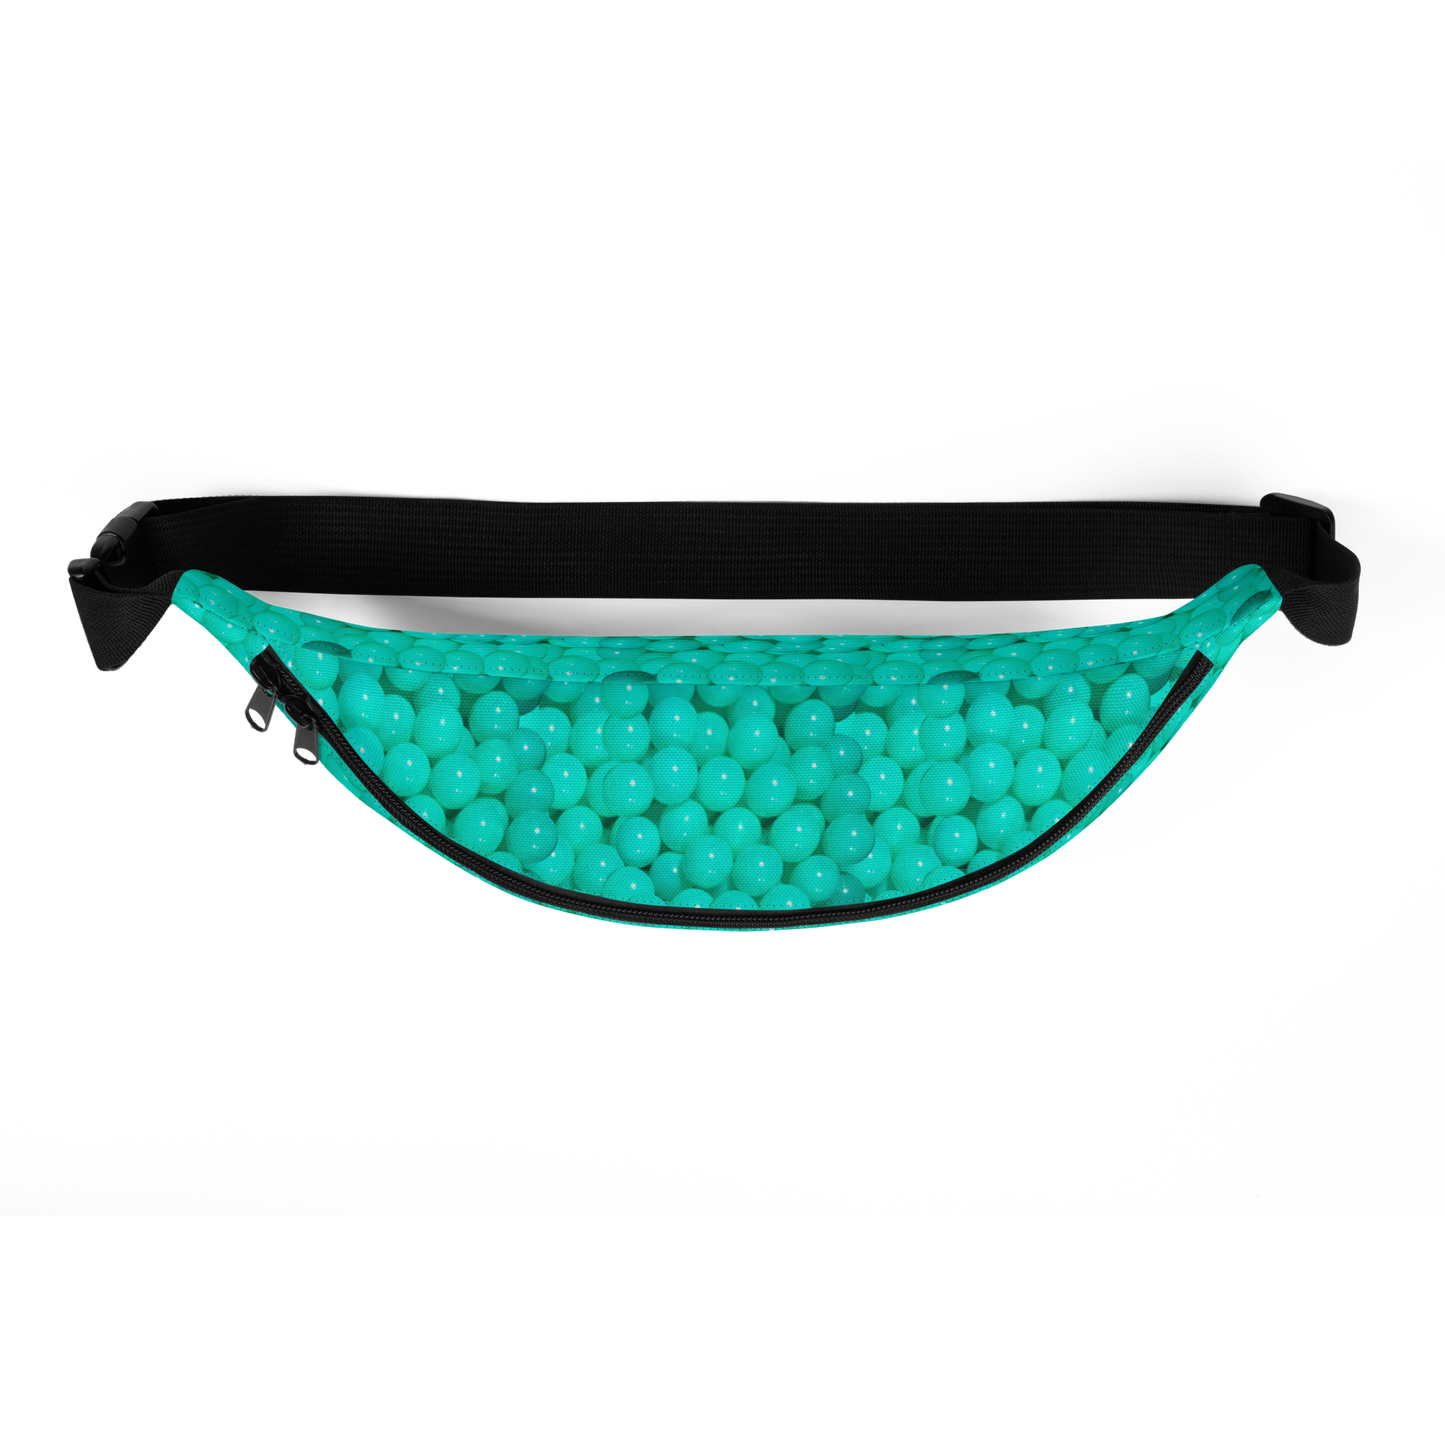 Ball Pit in Teal Fanny Pack